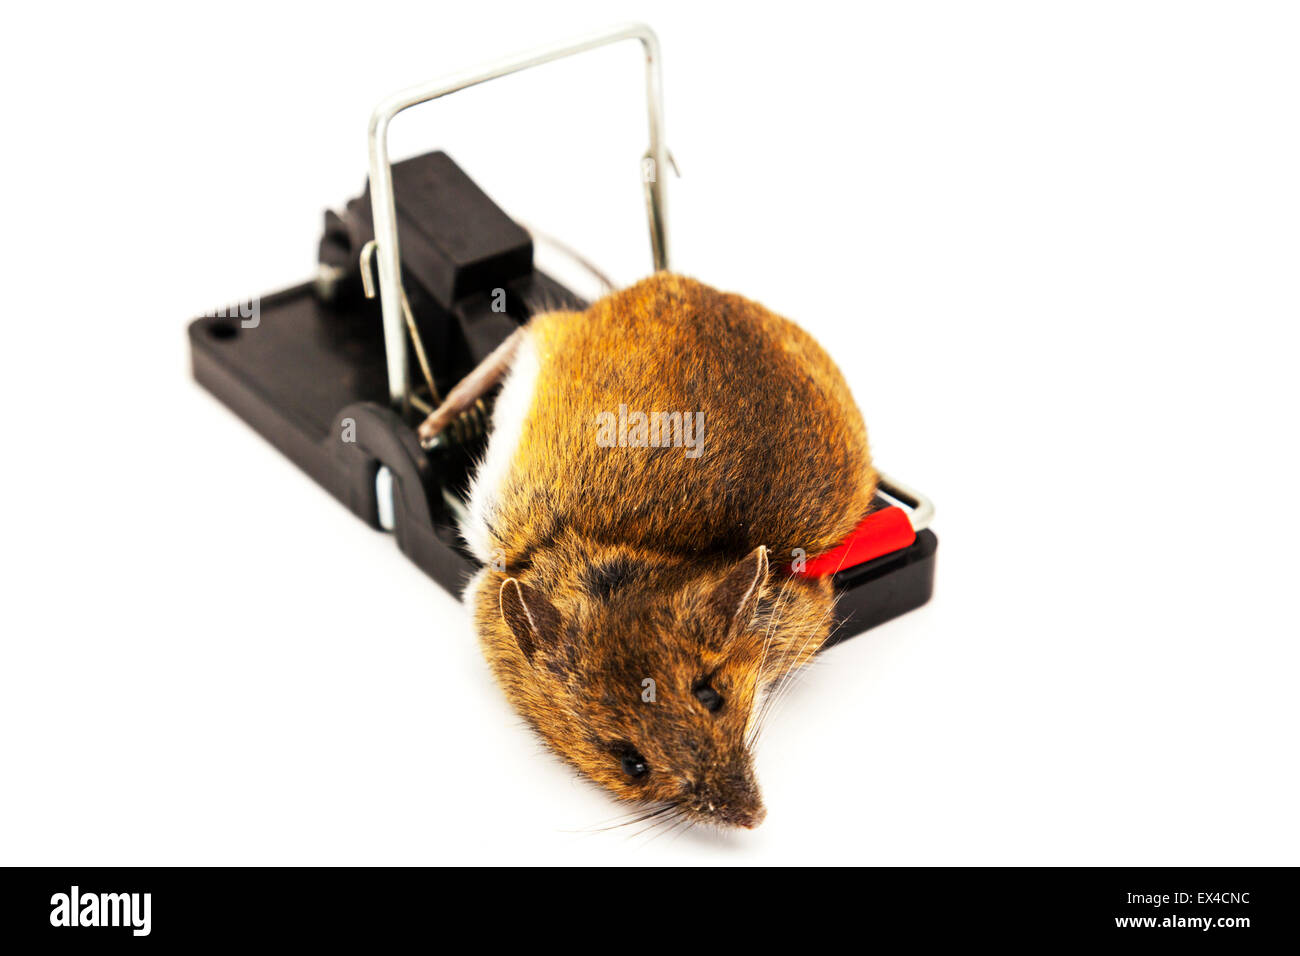 A live mouse caught in a humane mouse trap Stock Photo - Alamy